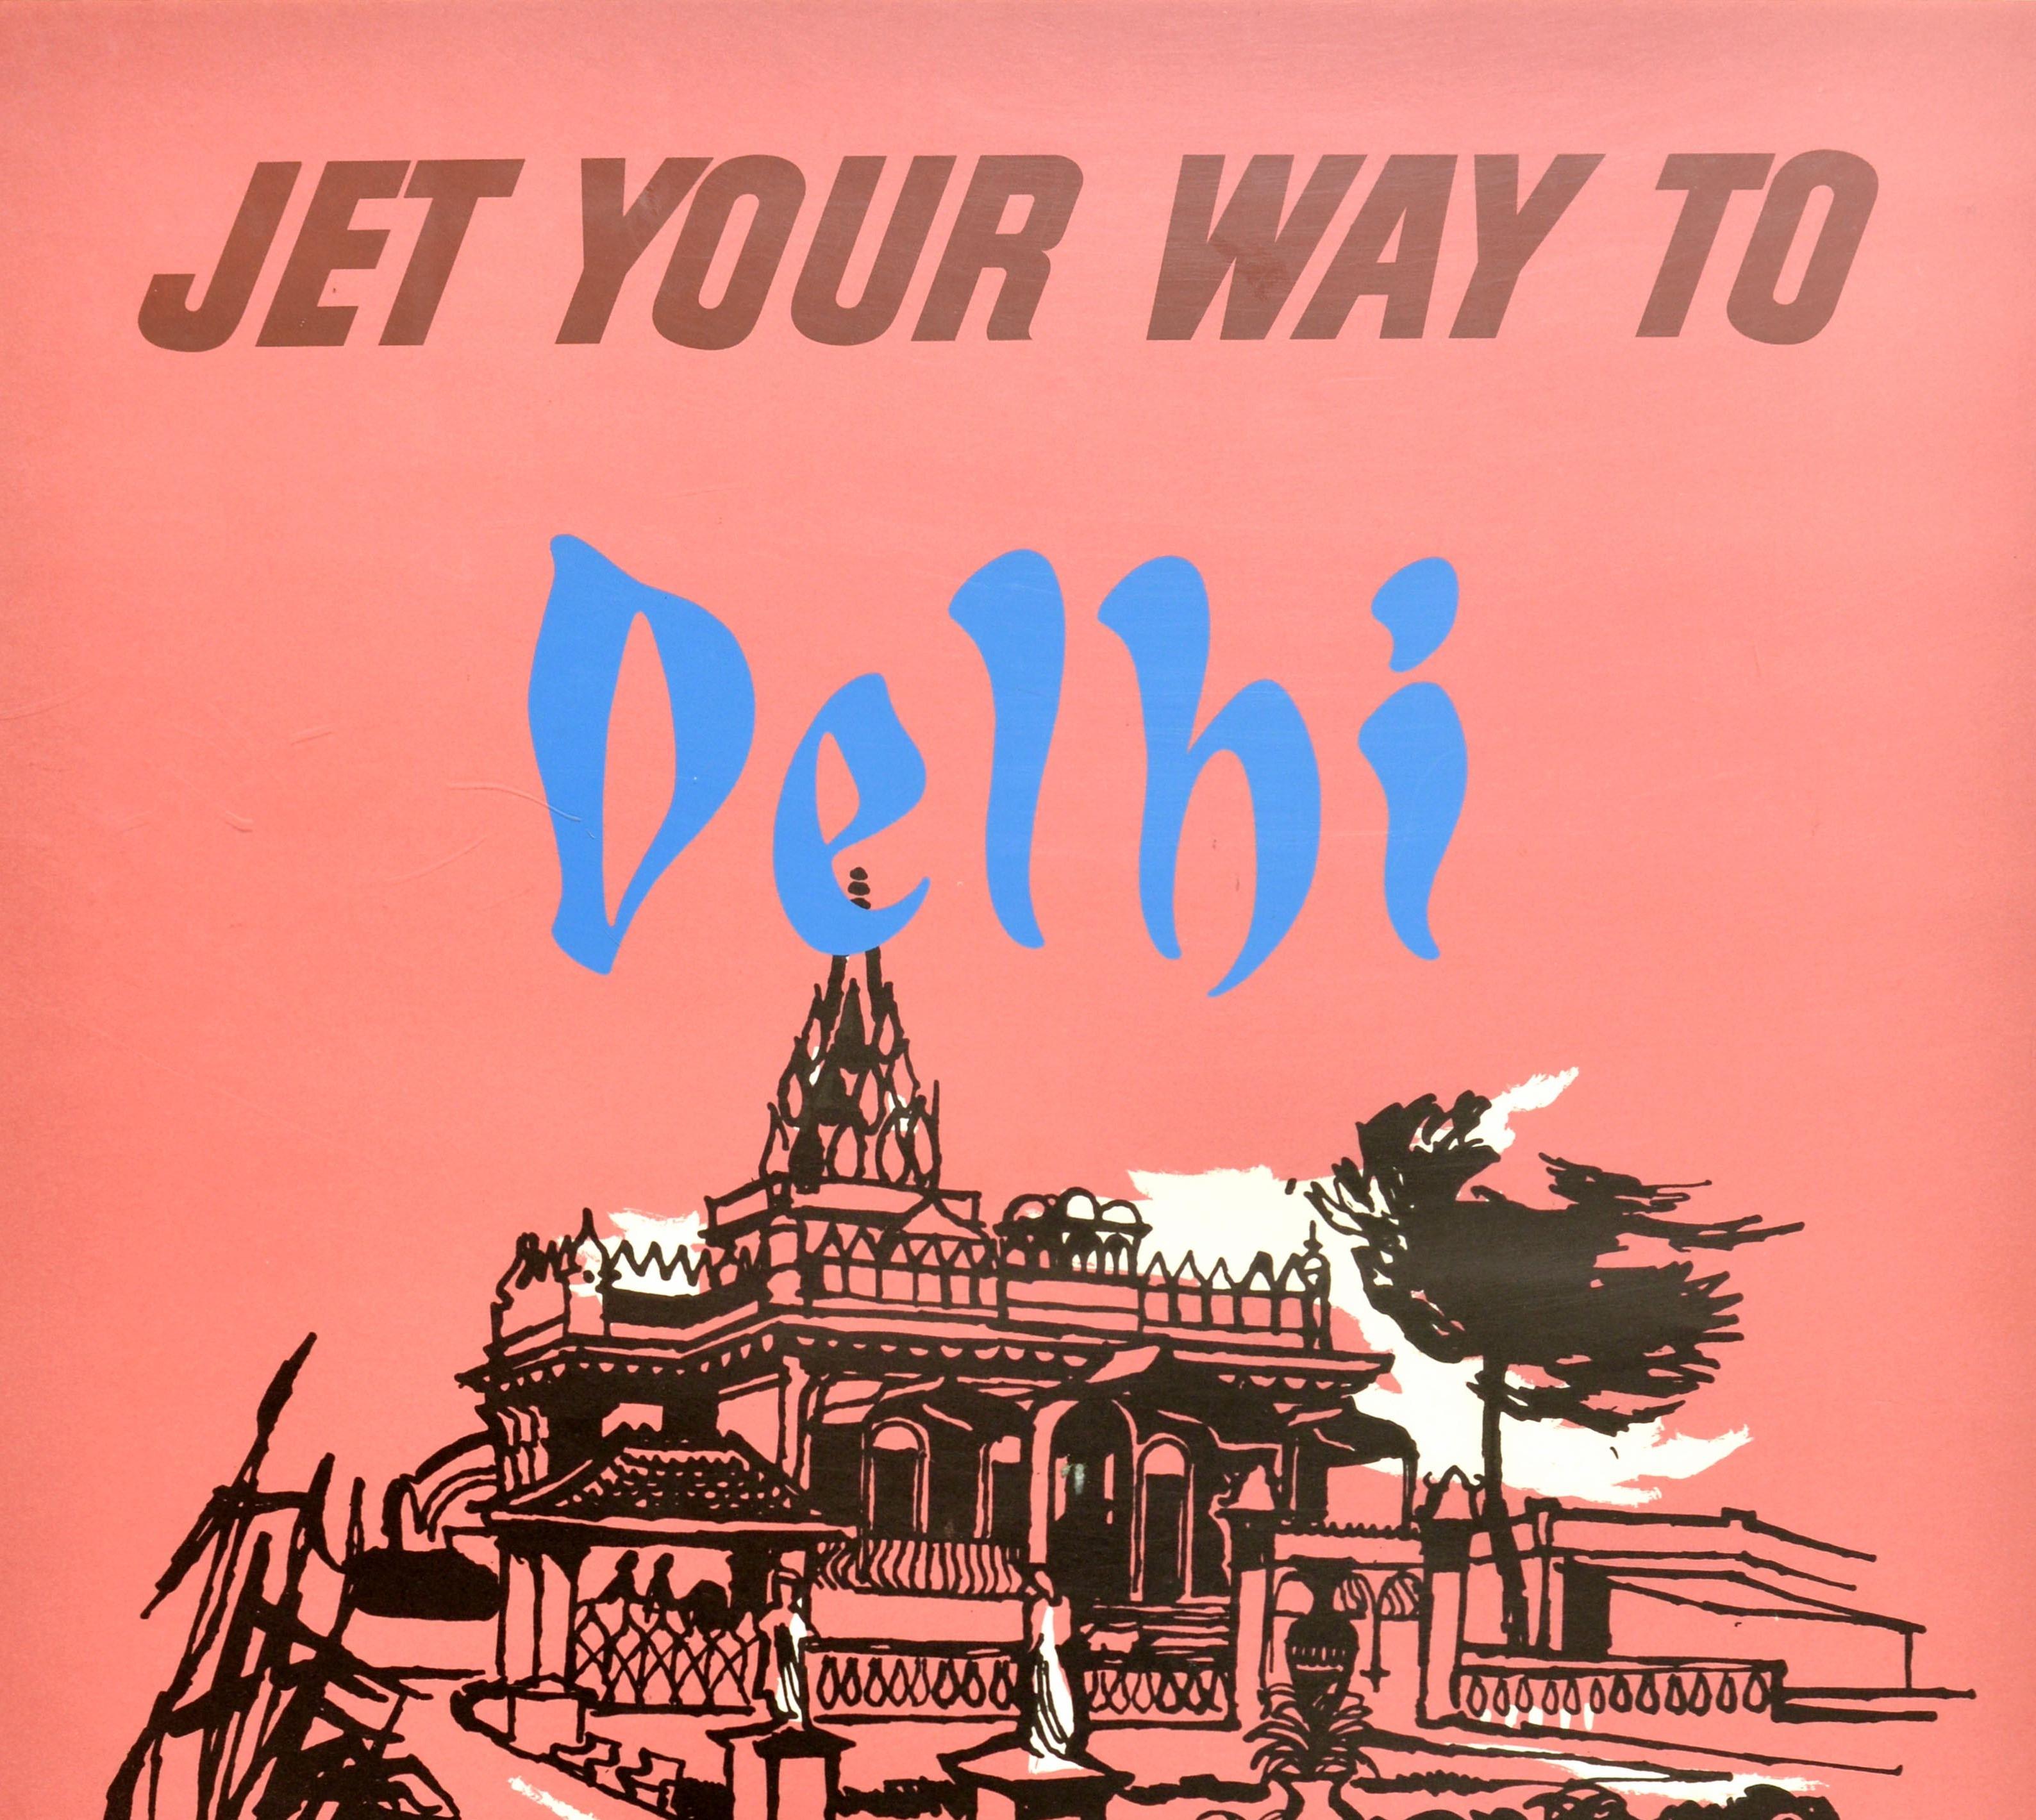 Original Vintage Poster Jet Your Way To Delhi By BOAC India World Travel Airline - Print by Unknown